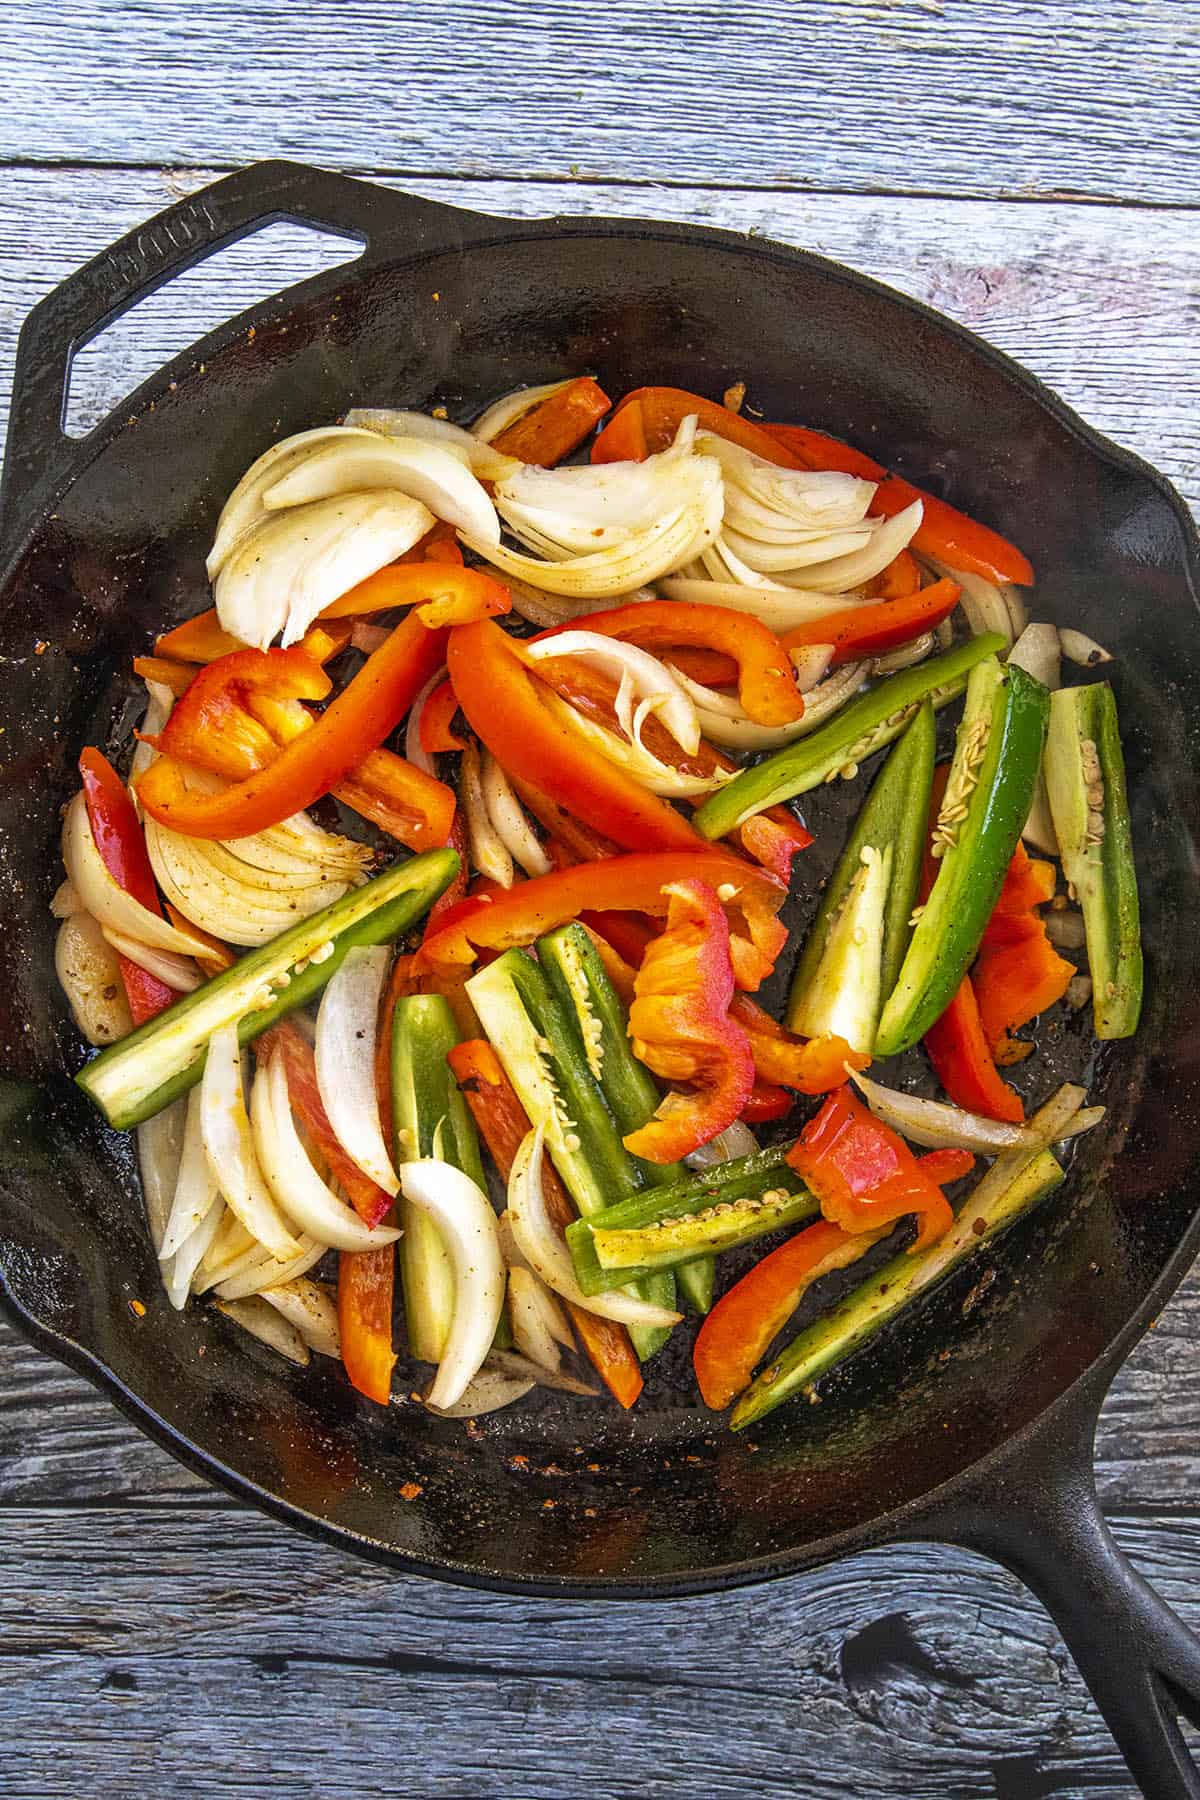 Cooking down peppers and onions in a hot pan